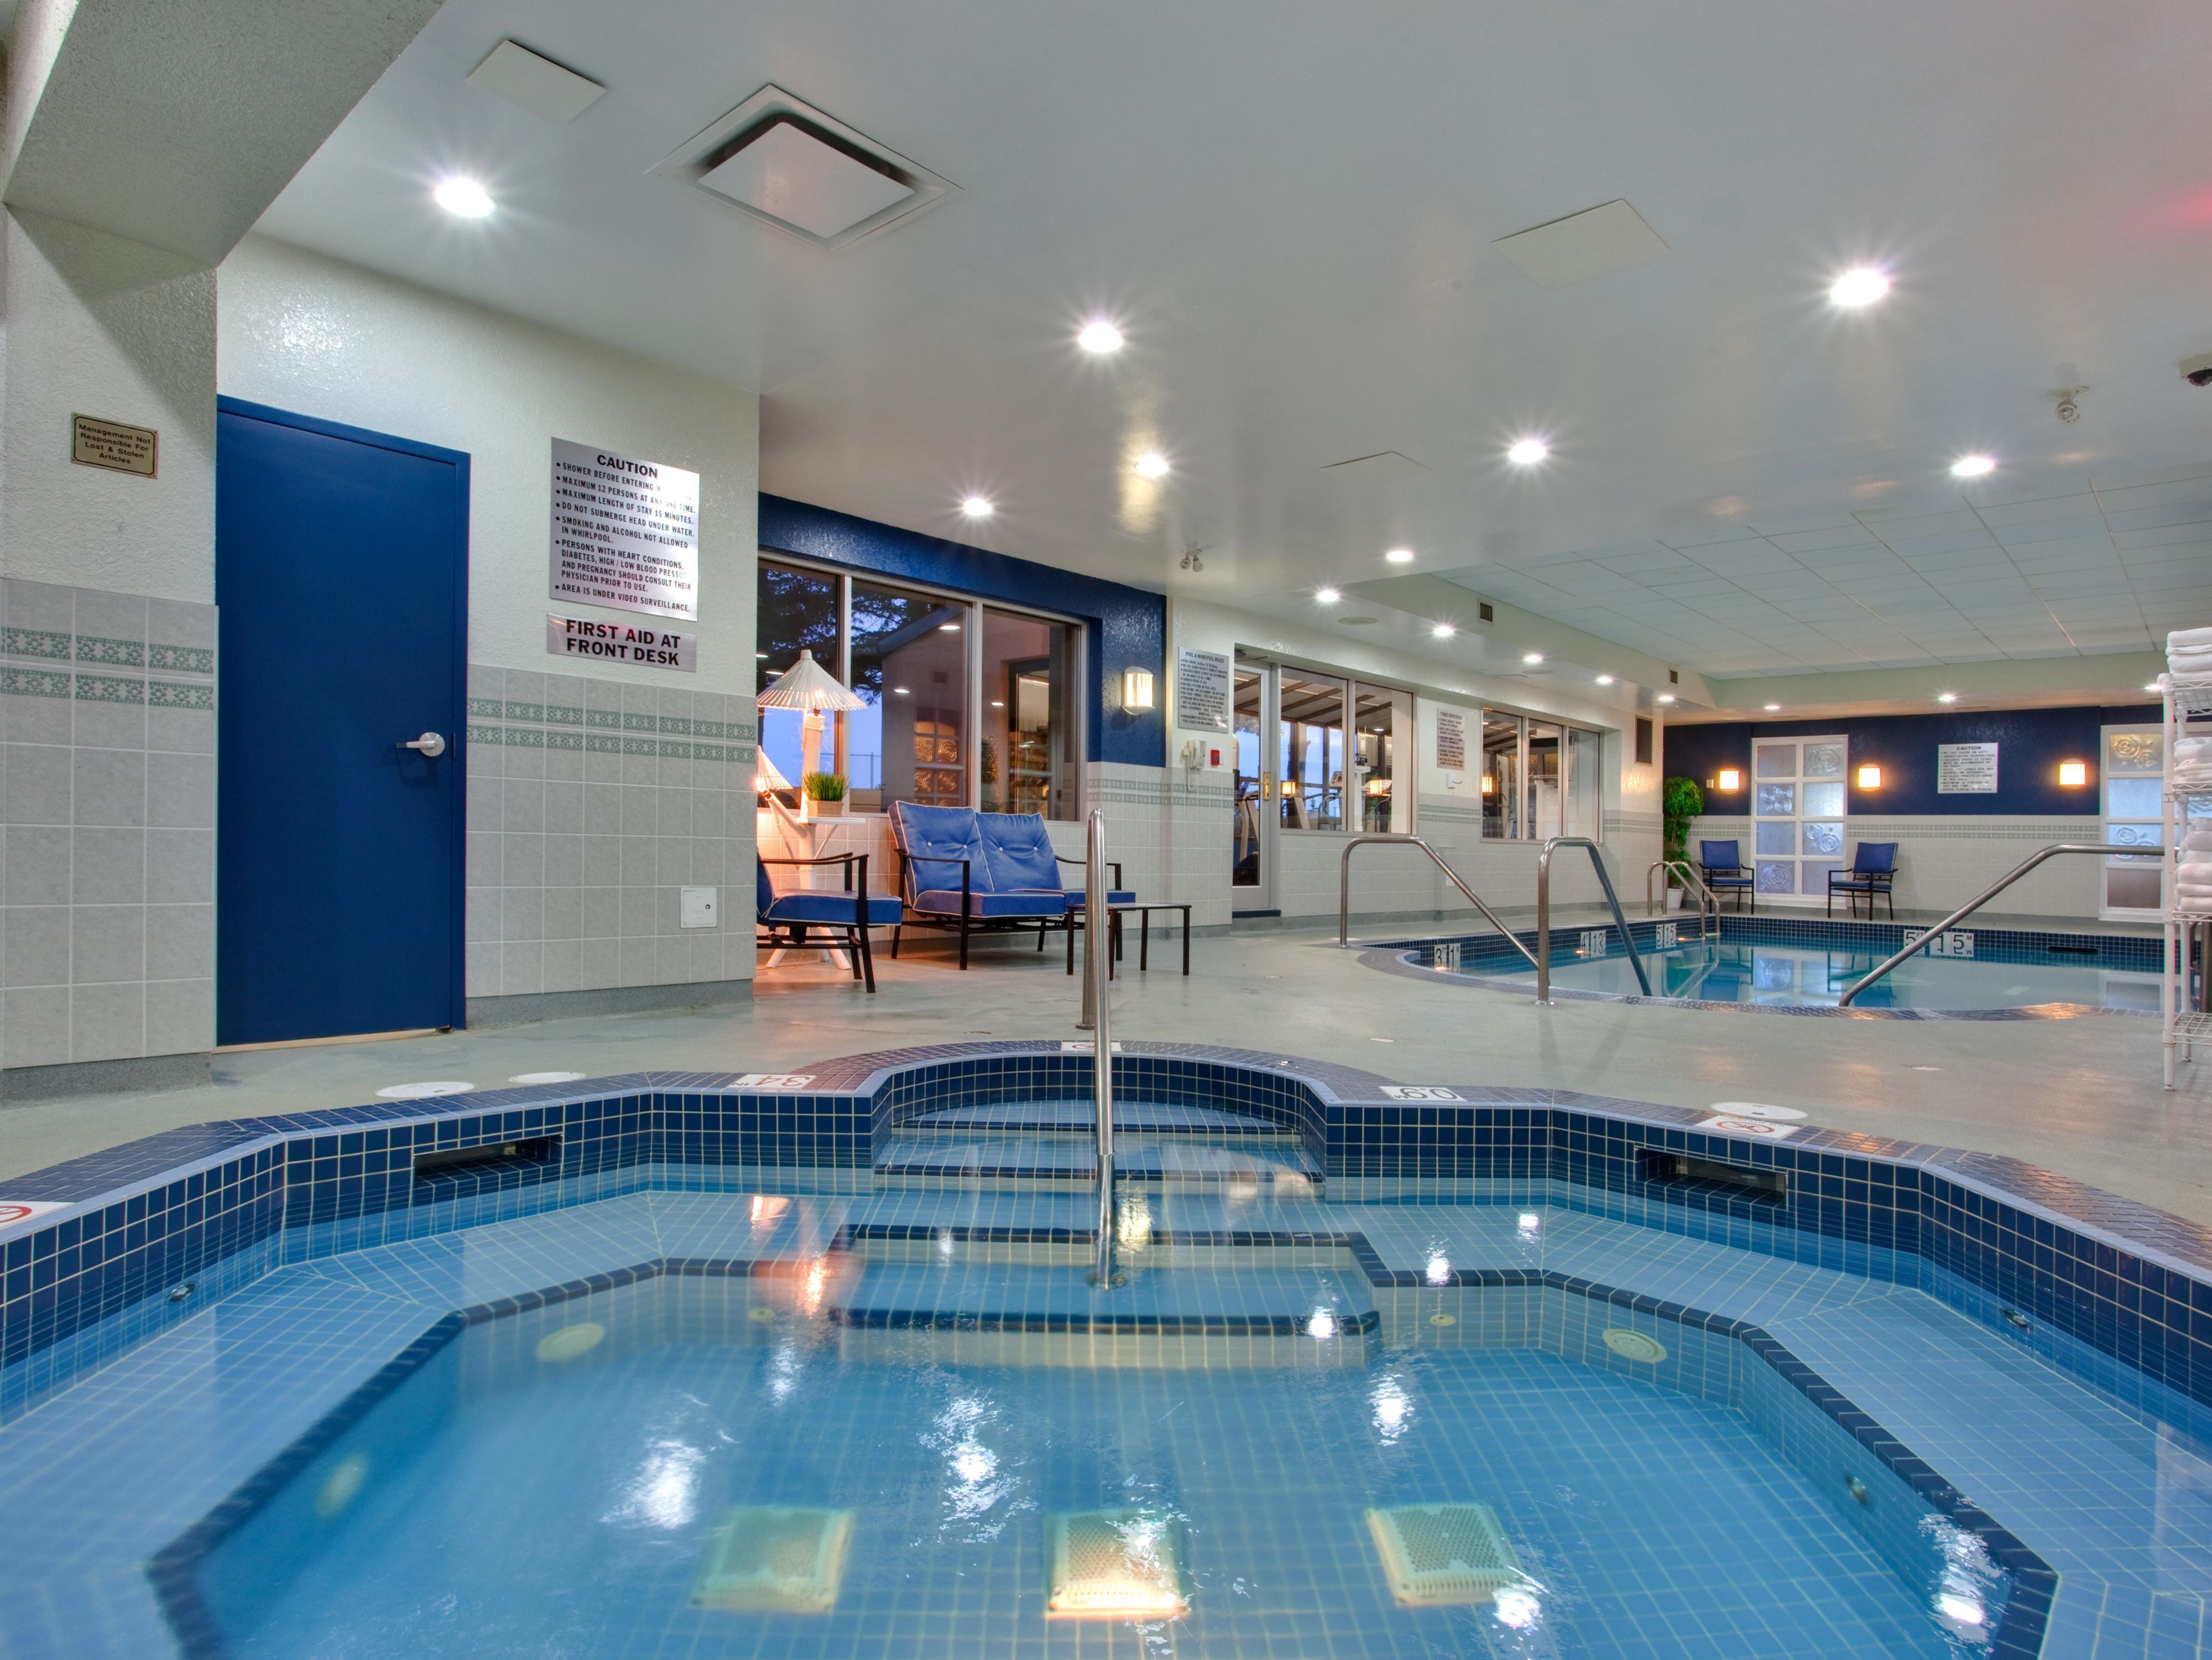 Take a dip in our heated indoor swimming pool or unwind in our hot tub.  Fun awaits for your entire family. 